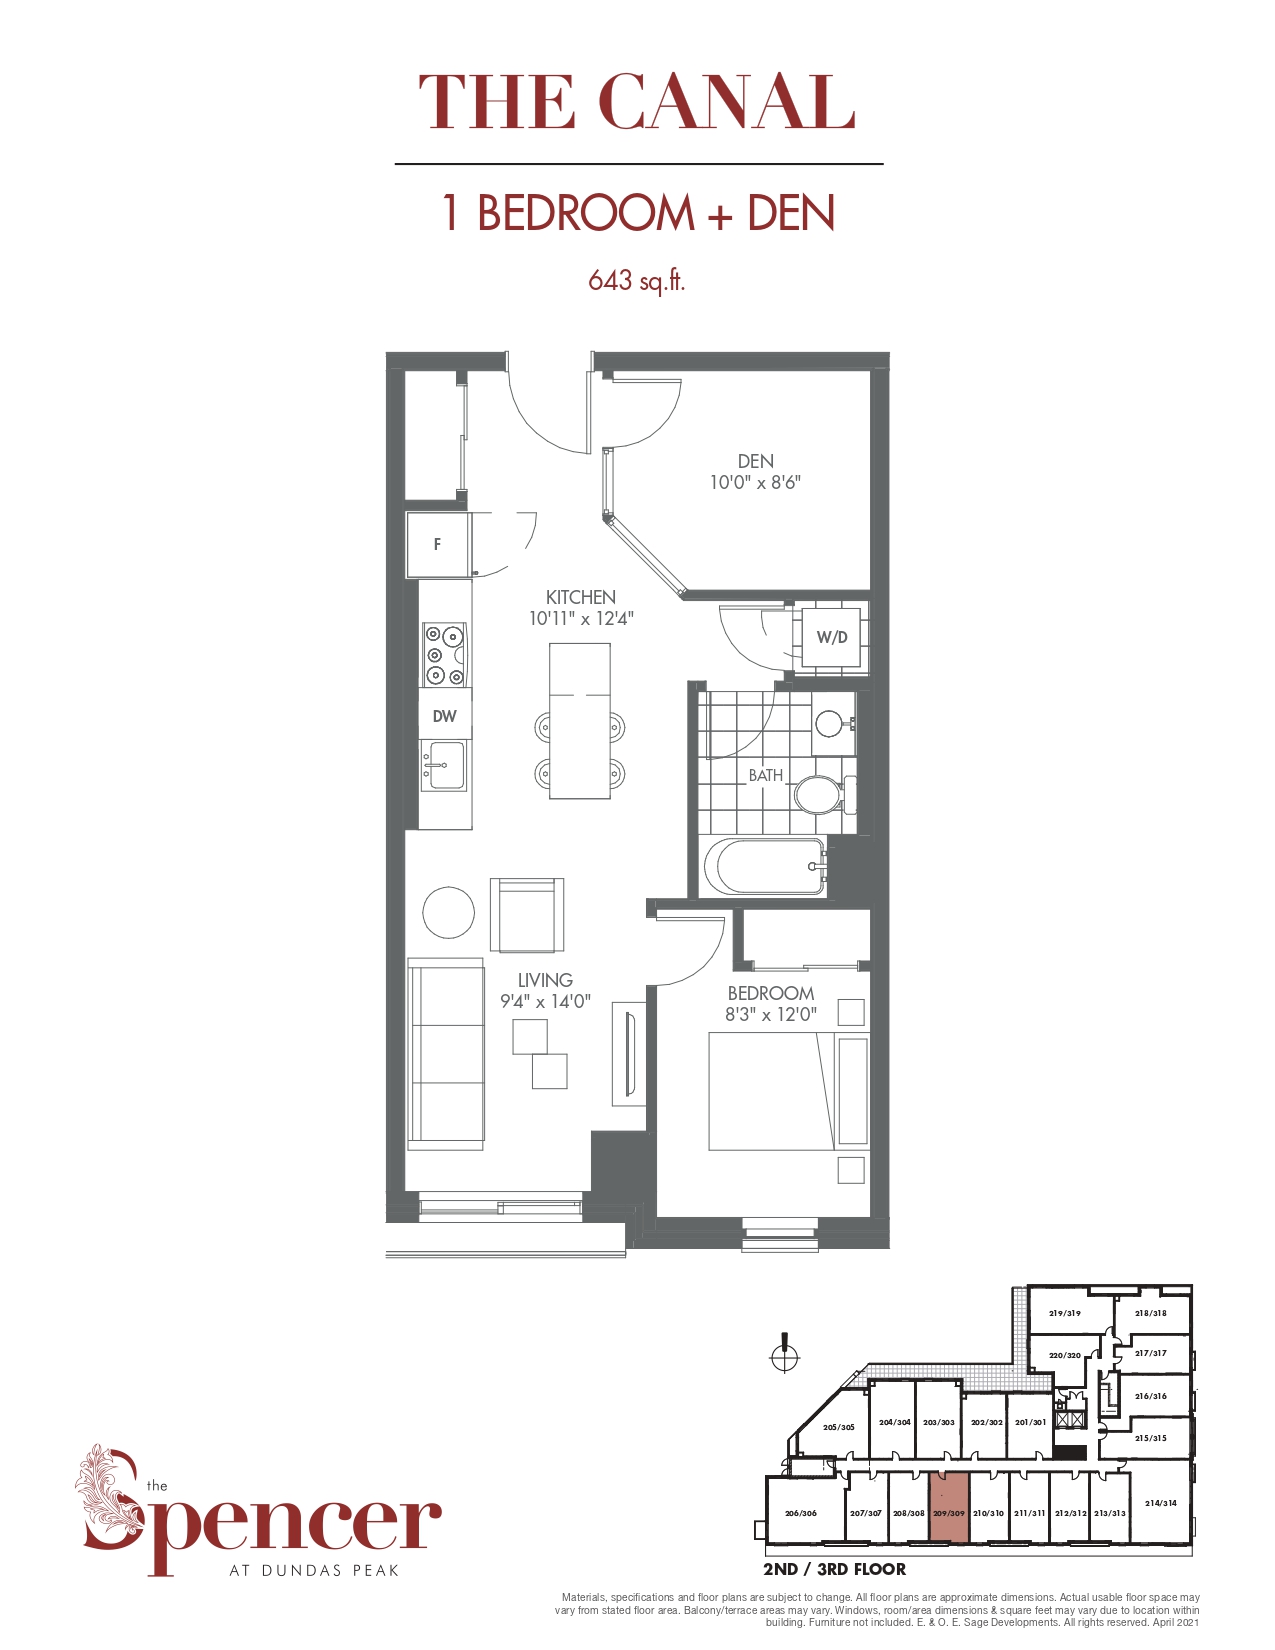  Floor Plan of The Spencer at Dundas Peak with undefined beds